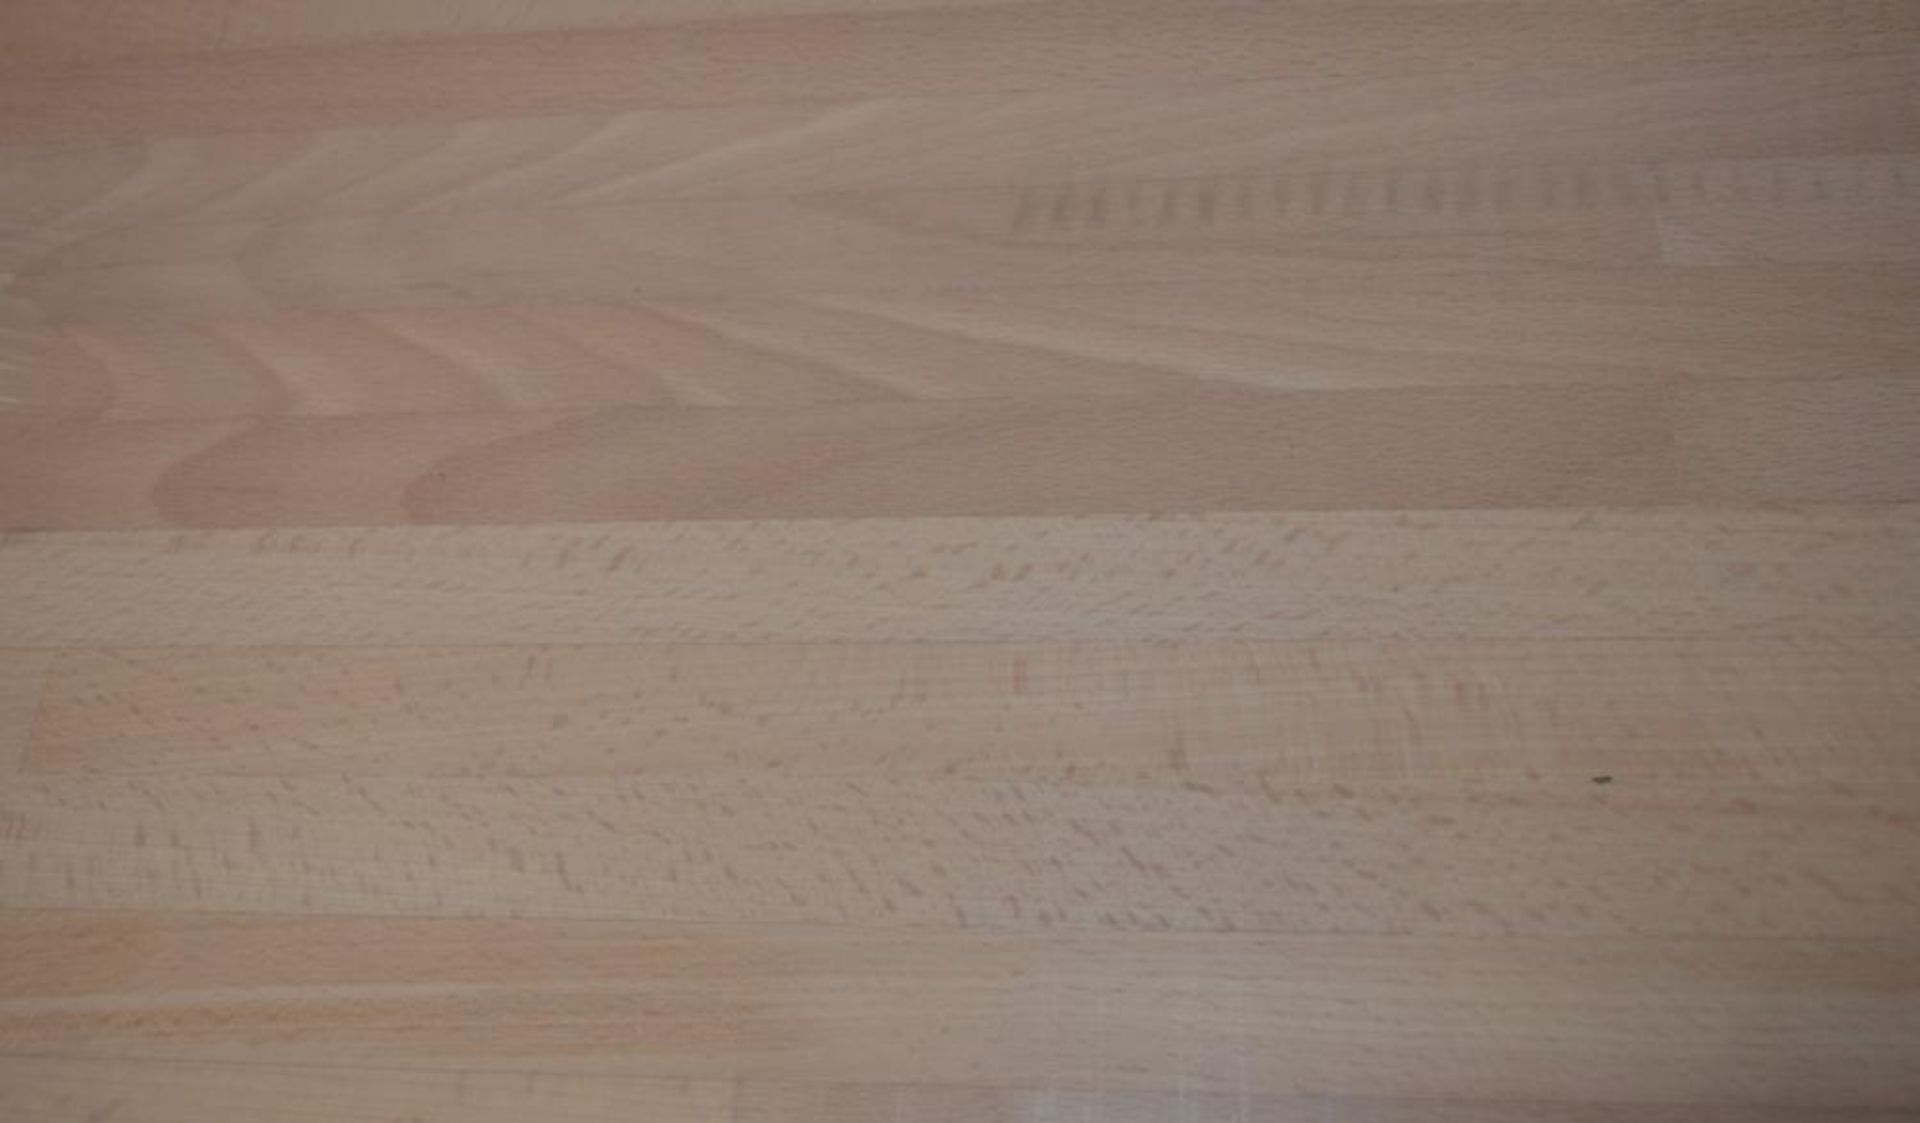 1 x Solid Wood Kitchen Worktop - PRIME BEECH - First Grade Finger Jointed Kitchen Worktop - Size: - Image 4 of 4